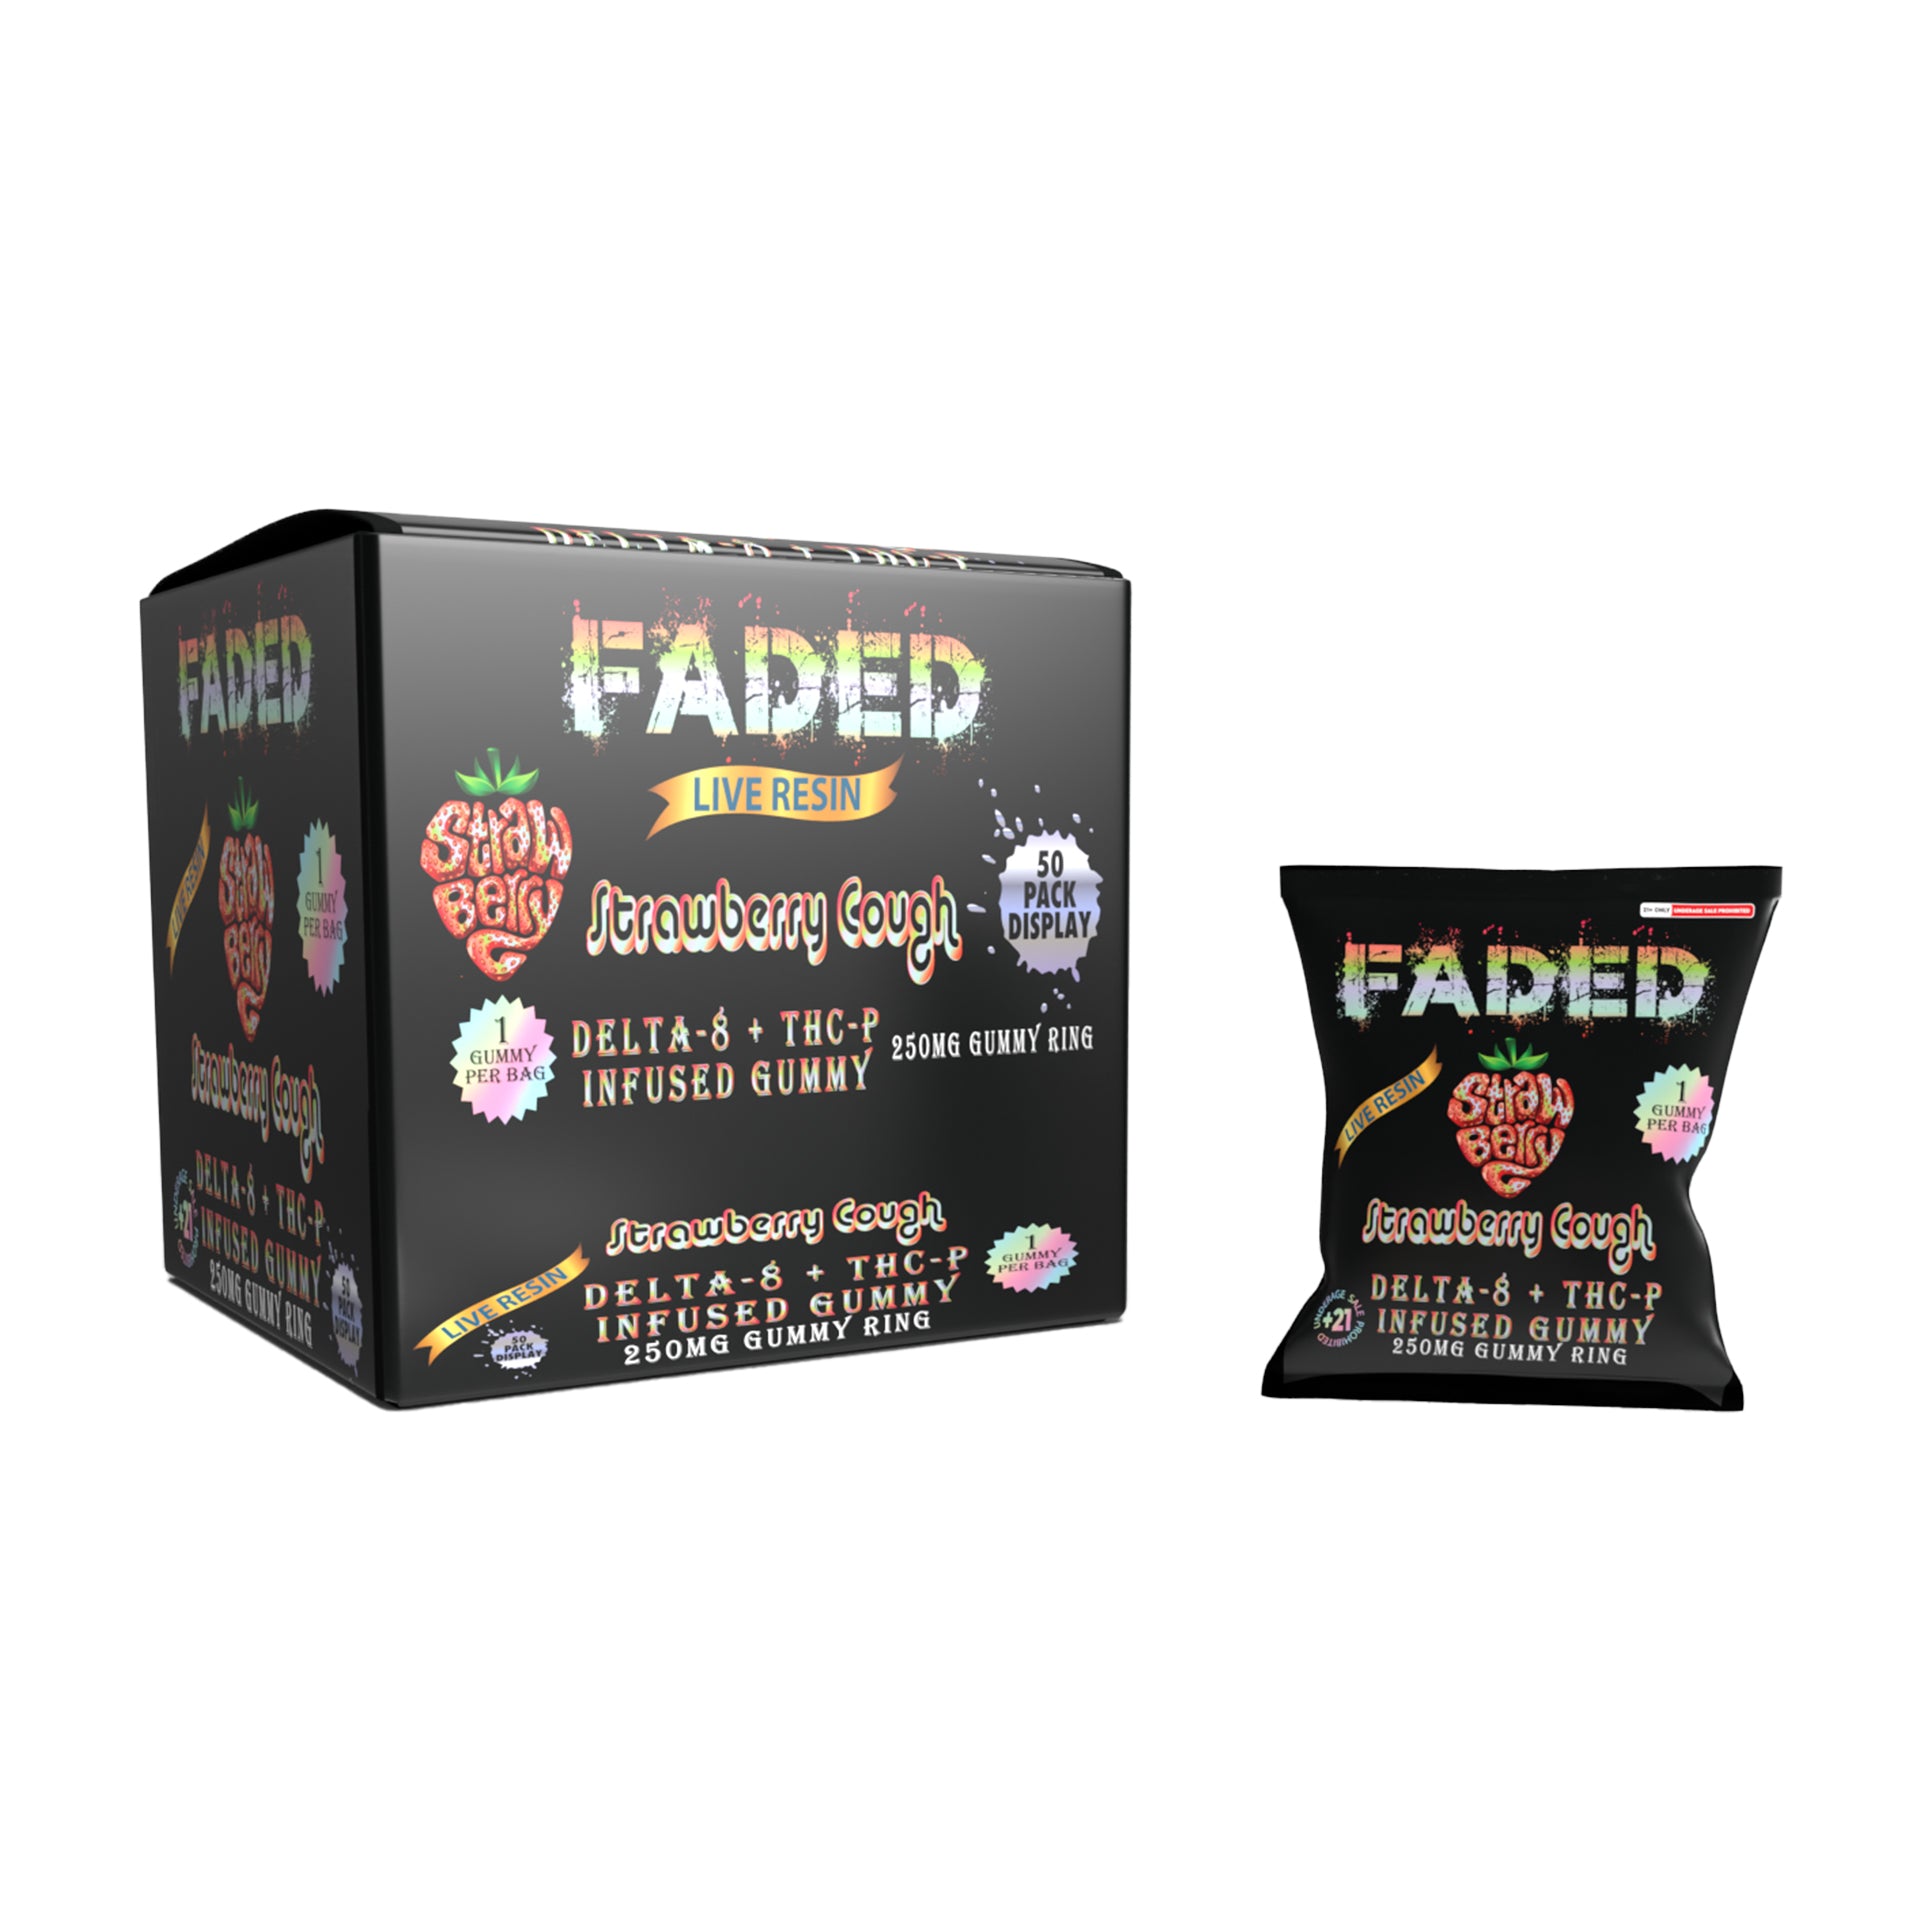 FADED DELTA - 8+THC-P STRAWBERRY COUGH 1CT GUMMY RING 250MG